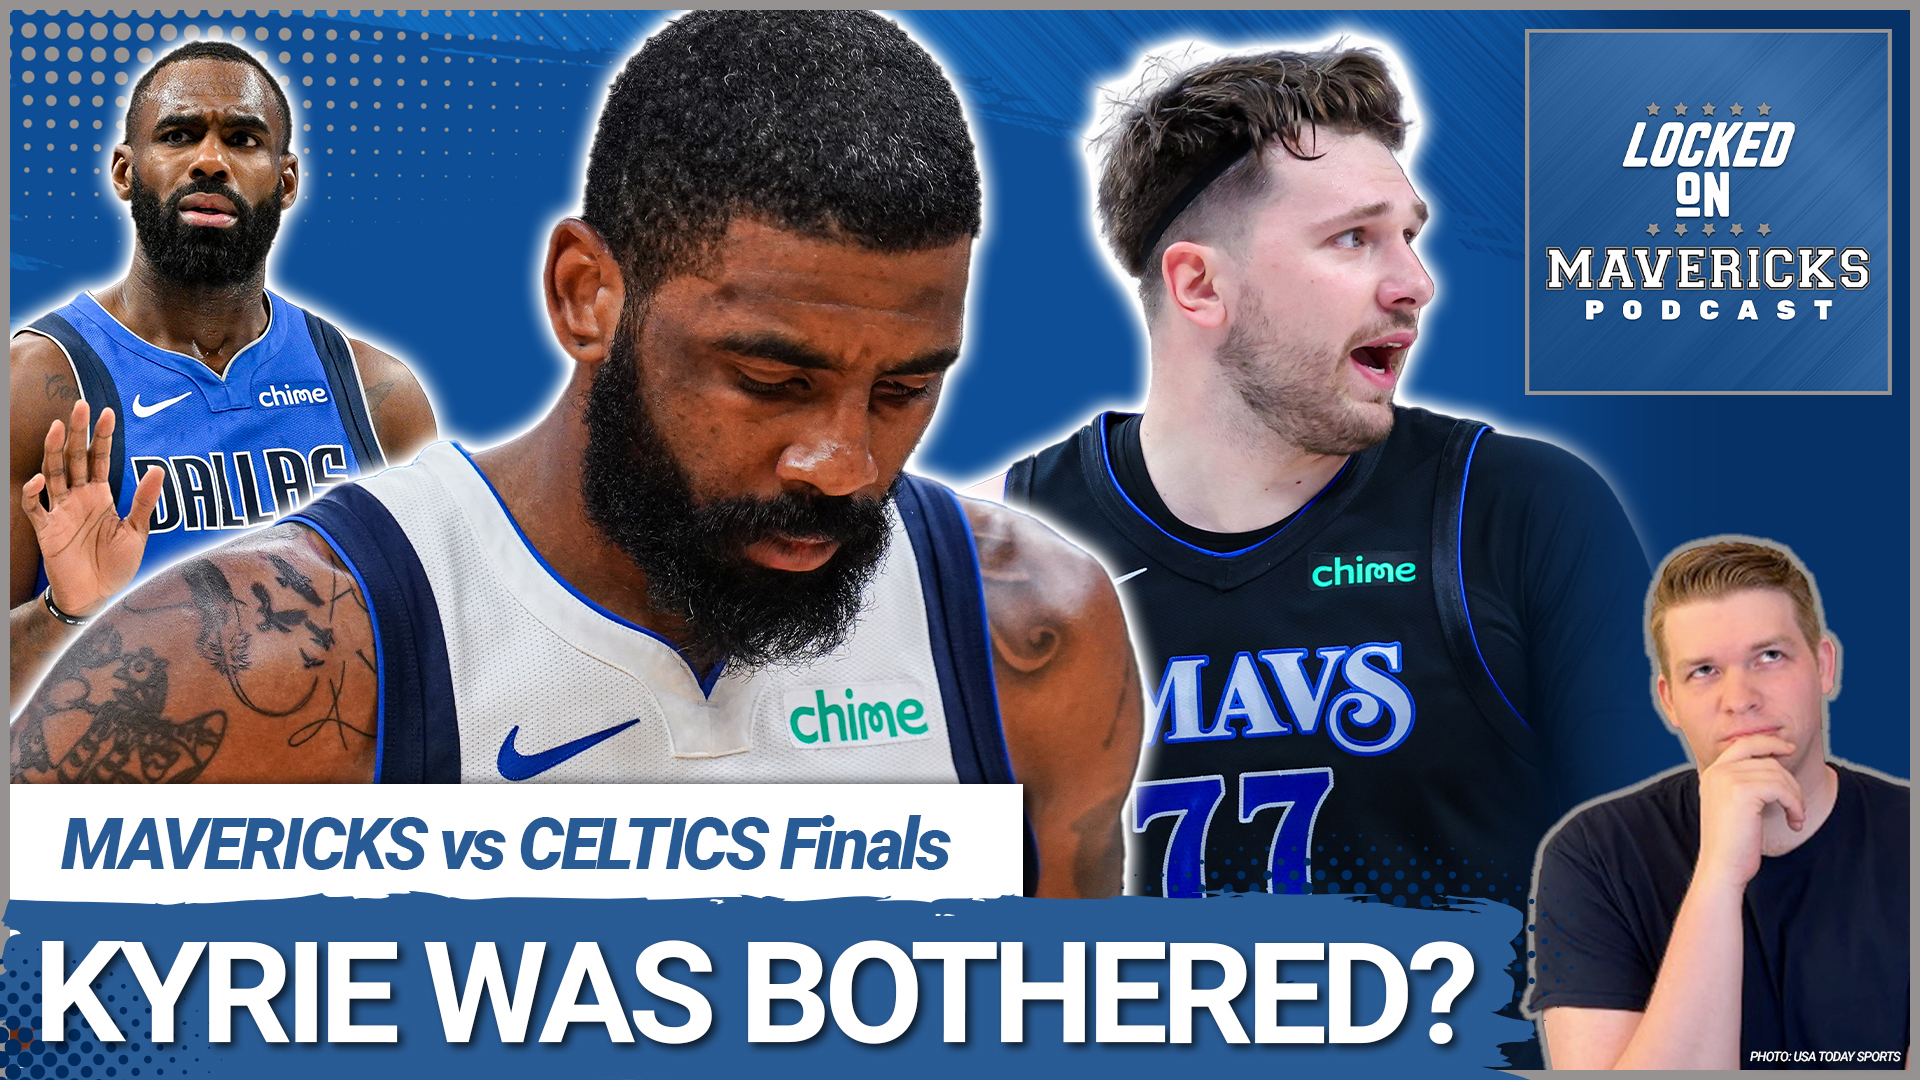 Nick Angstadt talks about how Kyrie Irving admitted to letting the Celtics' crowd affect him and Luka Doncic found out the level of play the Dallas Mavericks need.